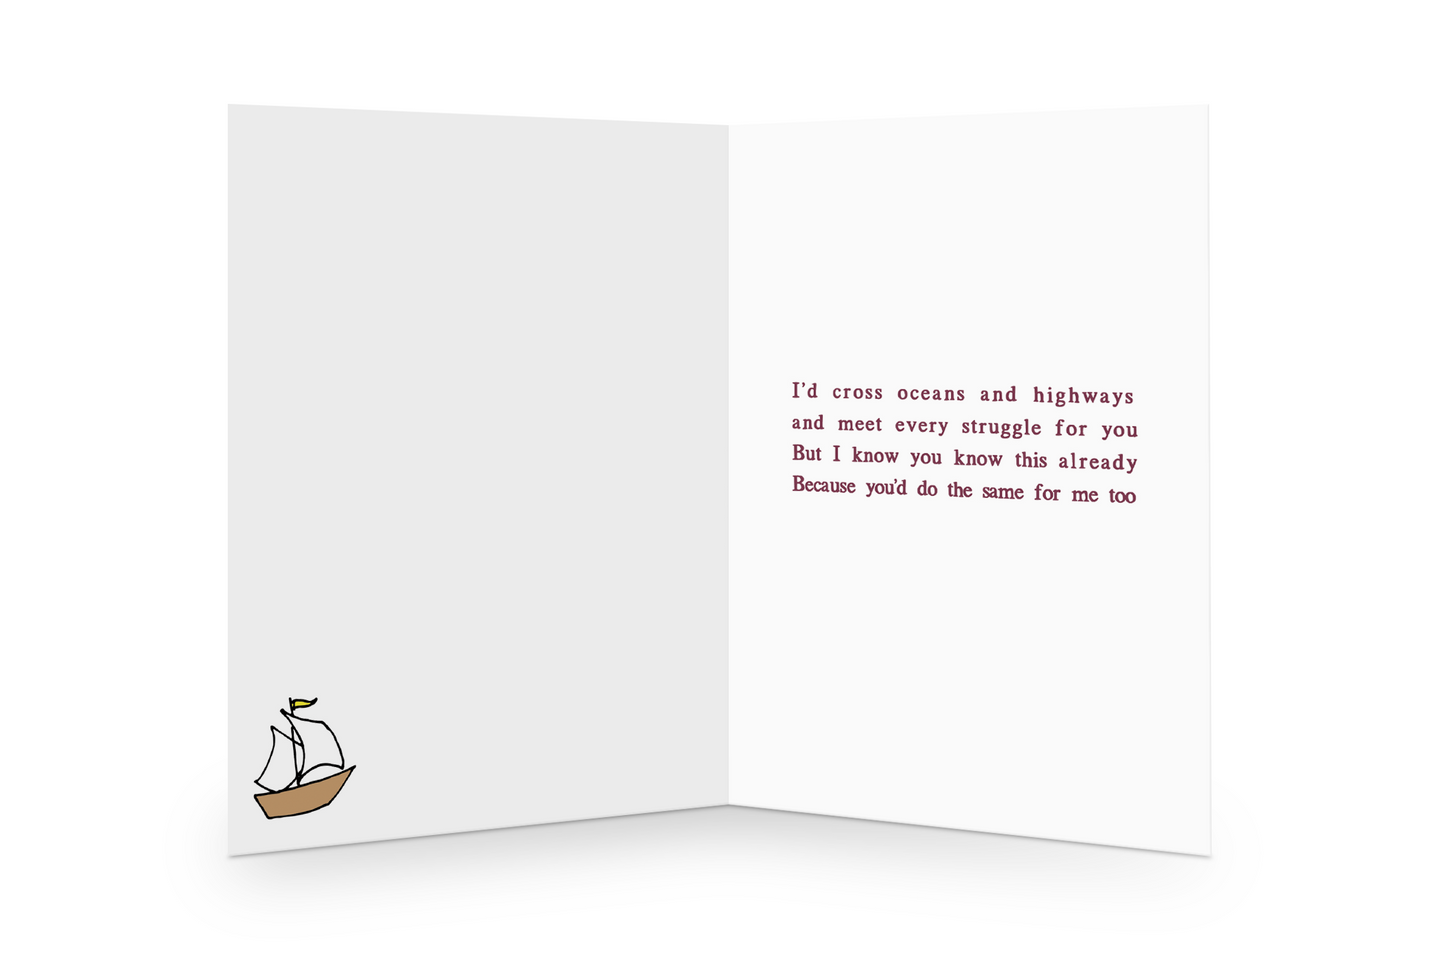 Love poem inside greeting card by Courtney Peppernell